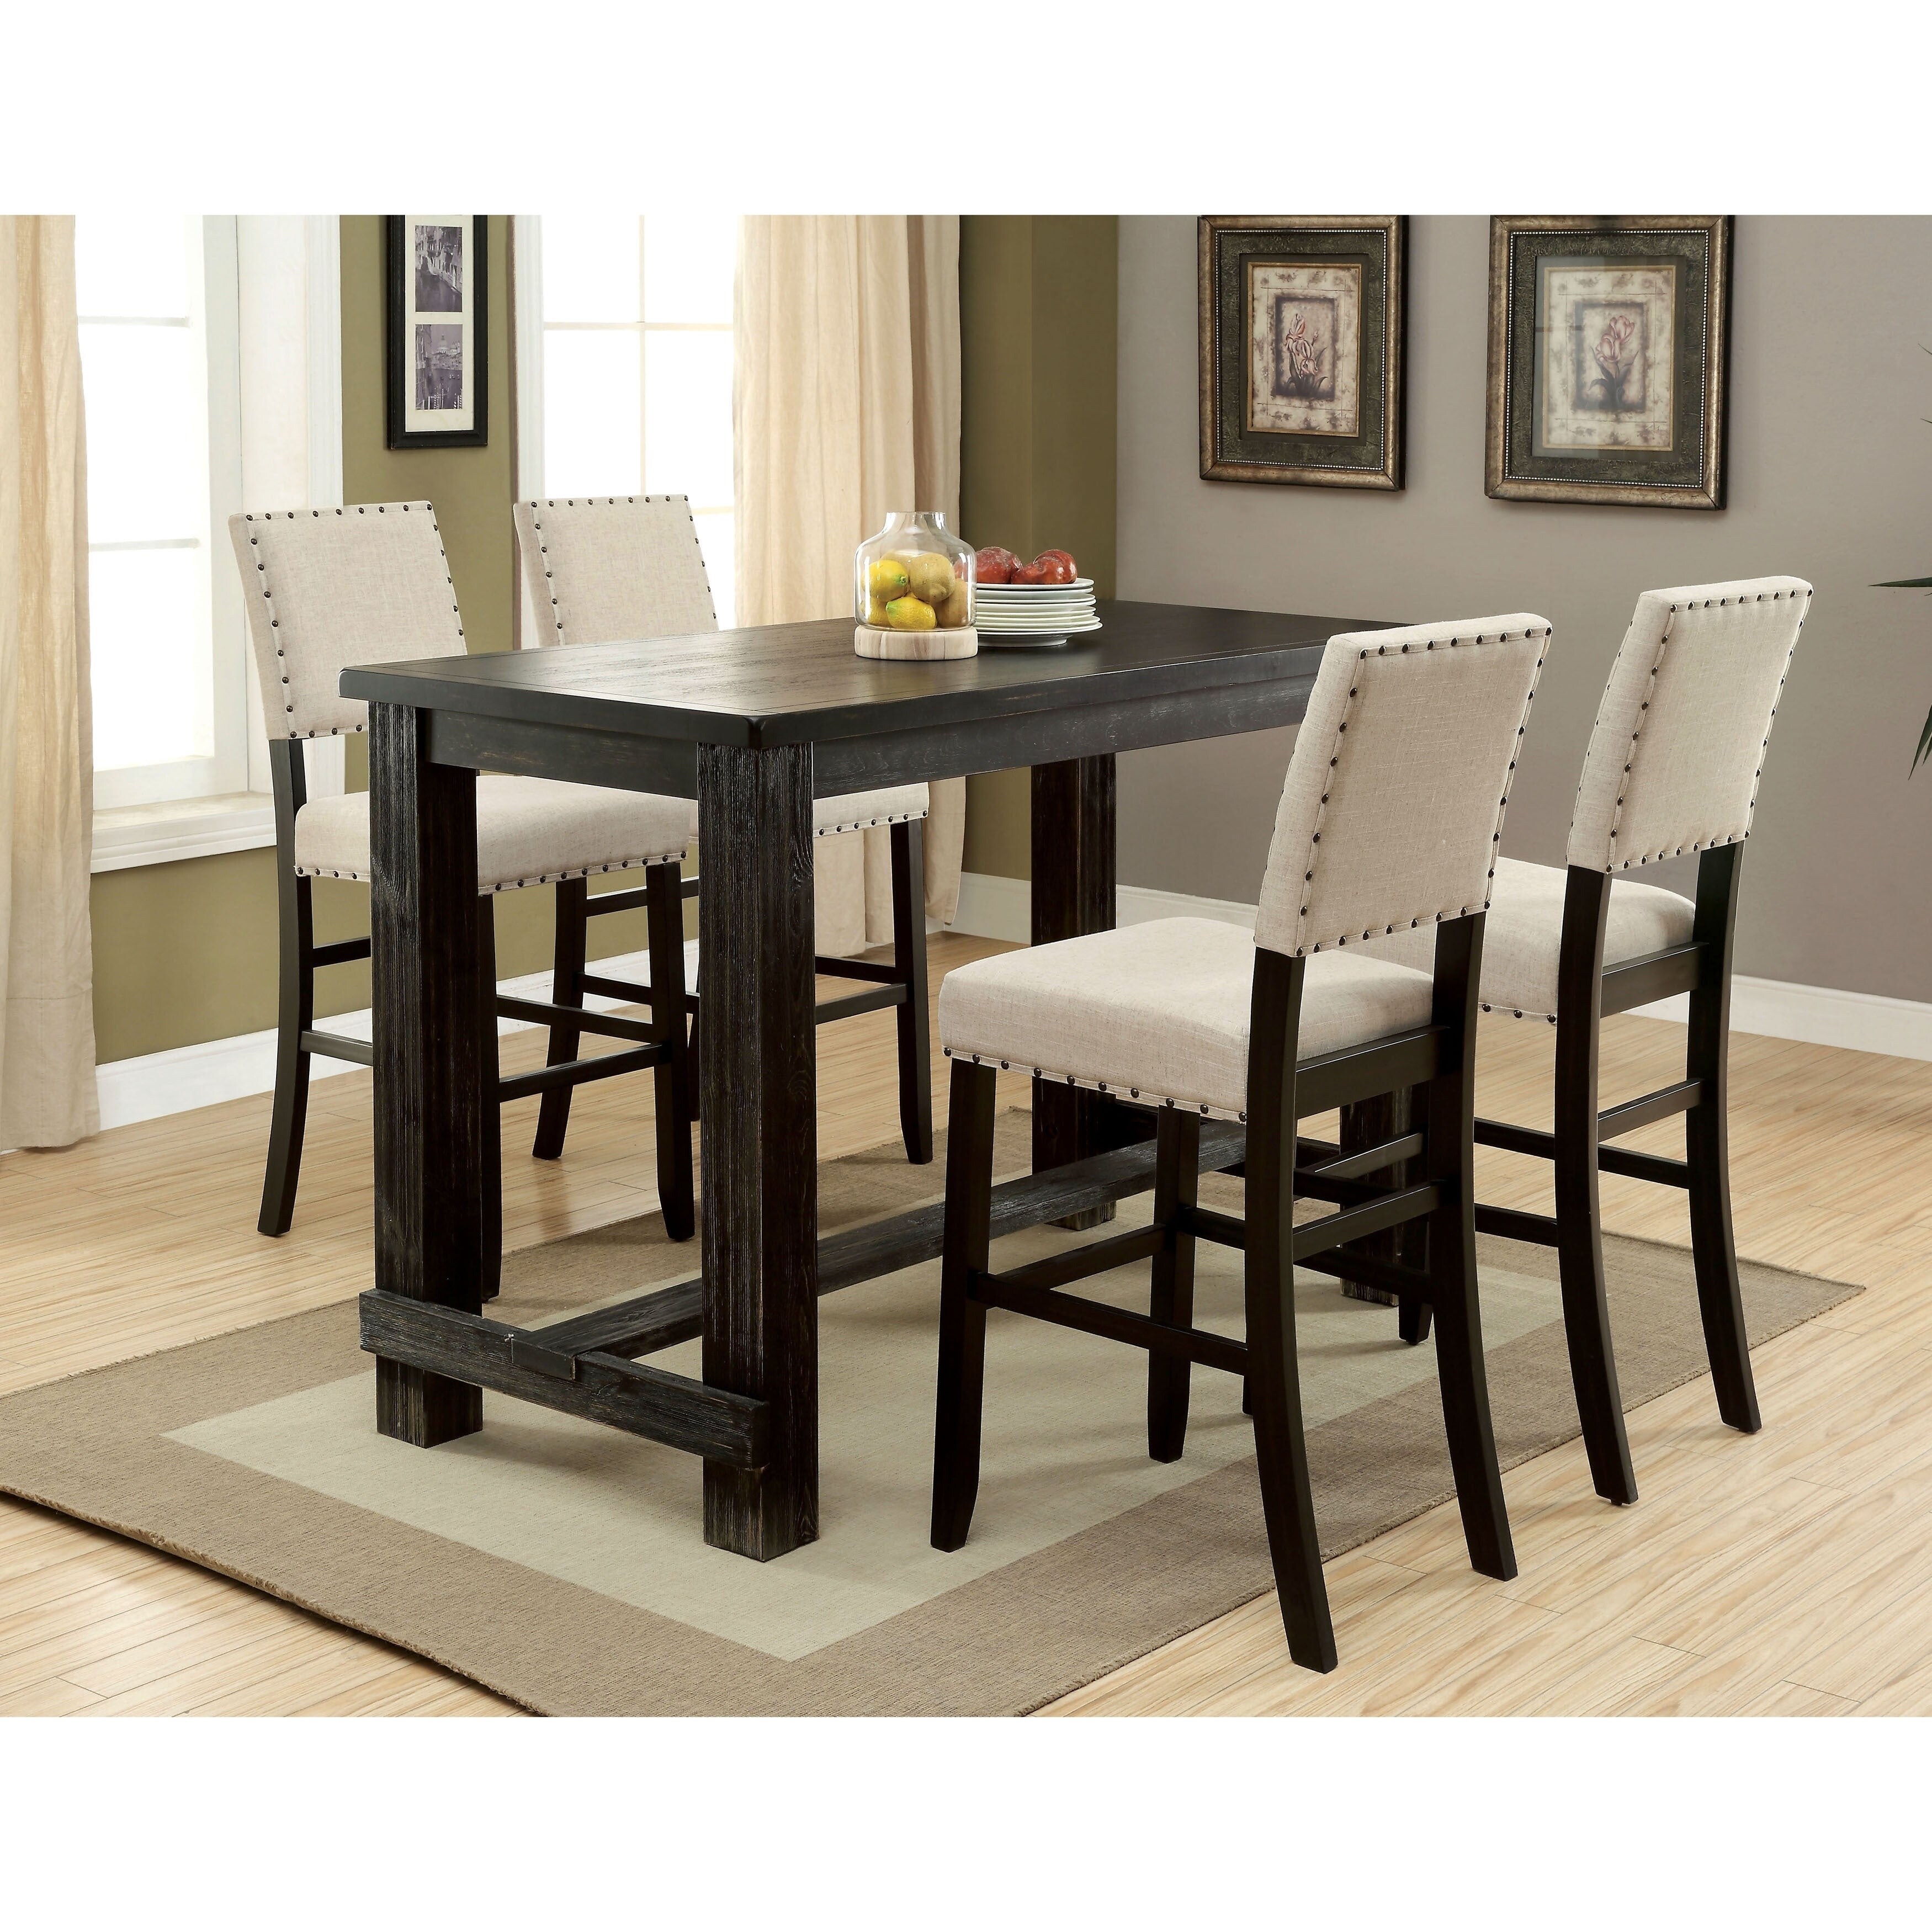 Buy Bar Pub Tables Online At Overstock Our Best Dining Room